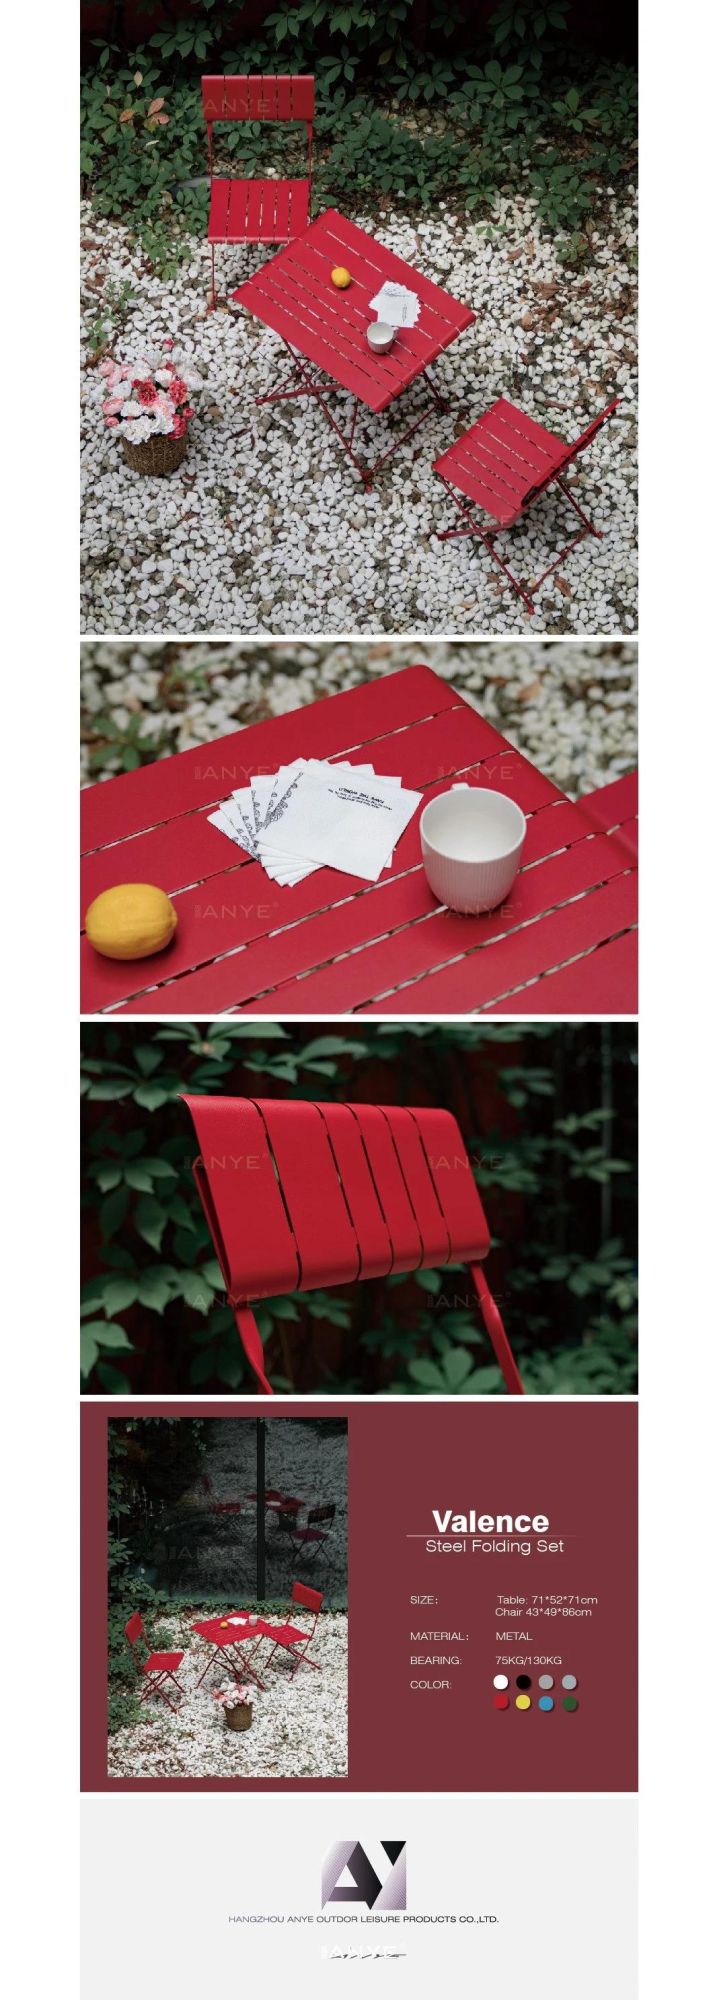 Durable Metal Slats Design Backyard Furniture Set Red Foldable Square Table Outdoor Folding Chair